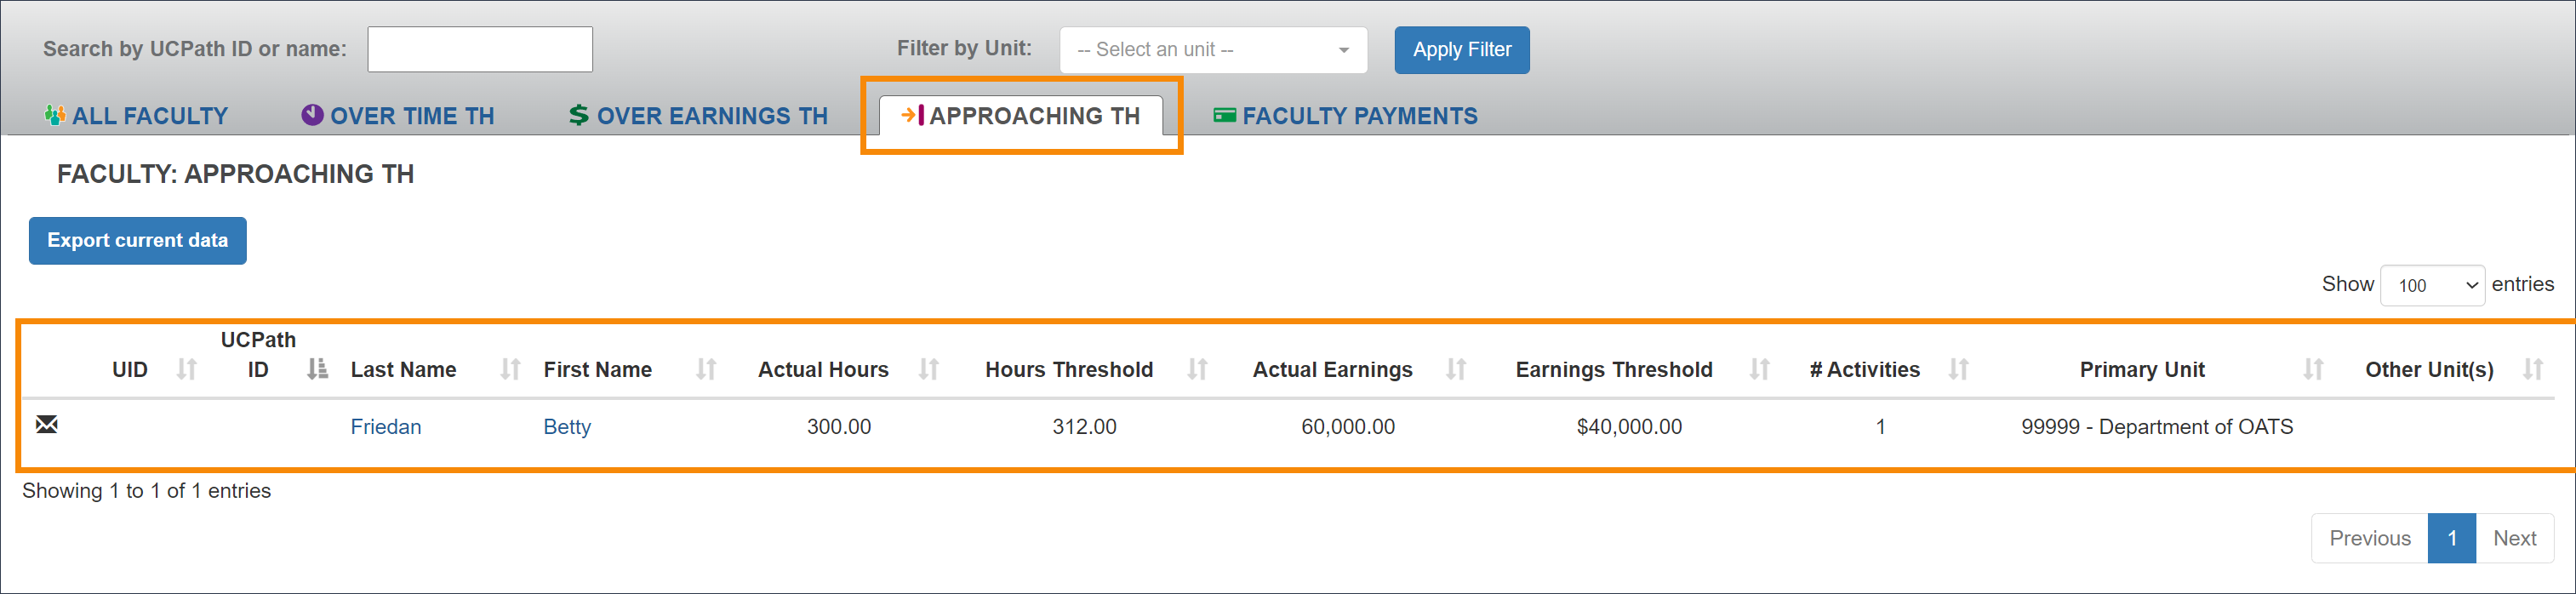 Approaching Threshold tab that shows faculty members within 10% of reaching their time threshold